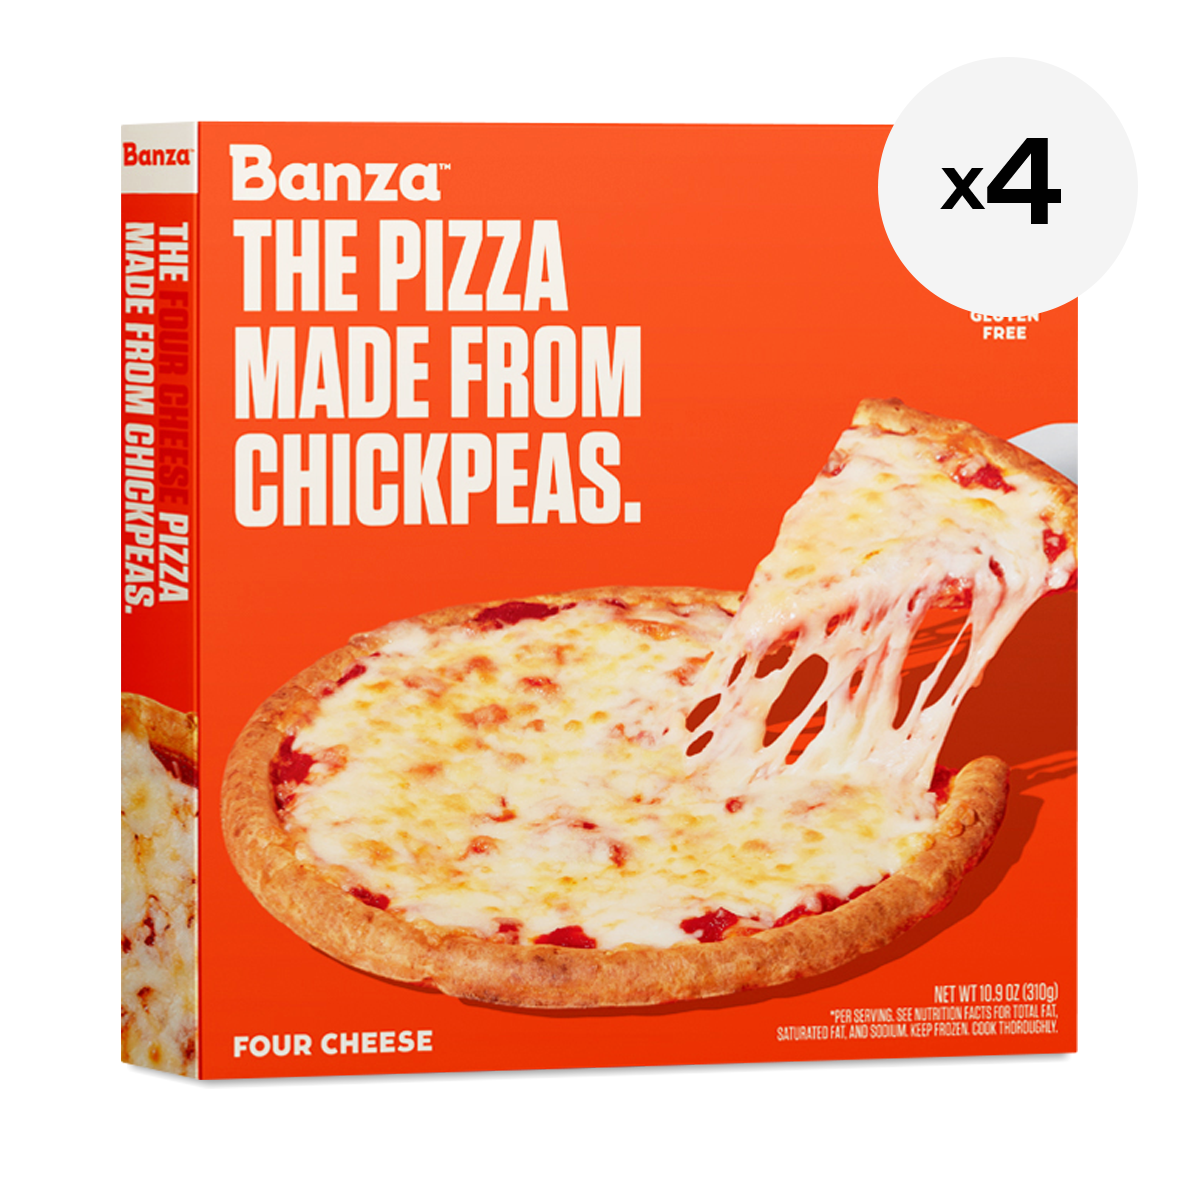 Banza Four Cheese Pizza, 4 Pack 4 x 10.9 oz boxes